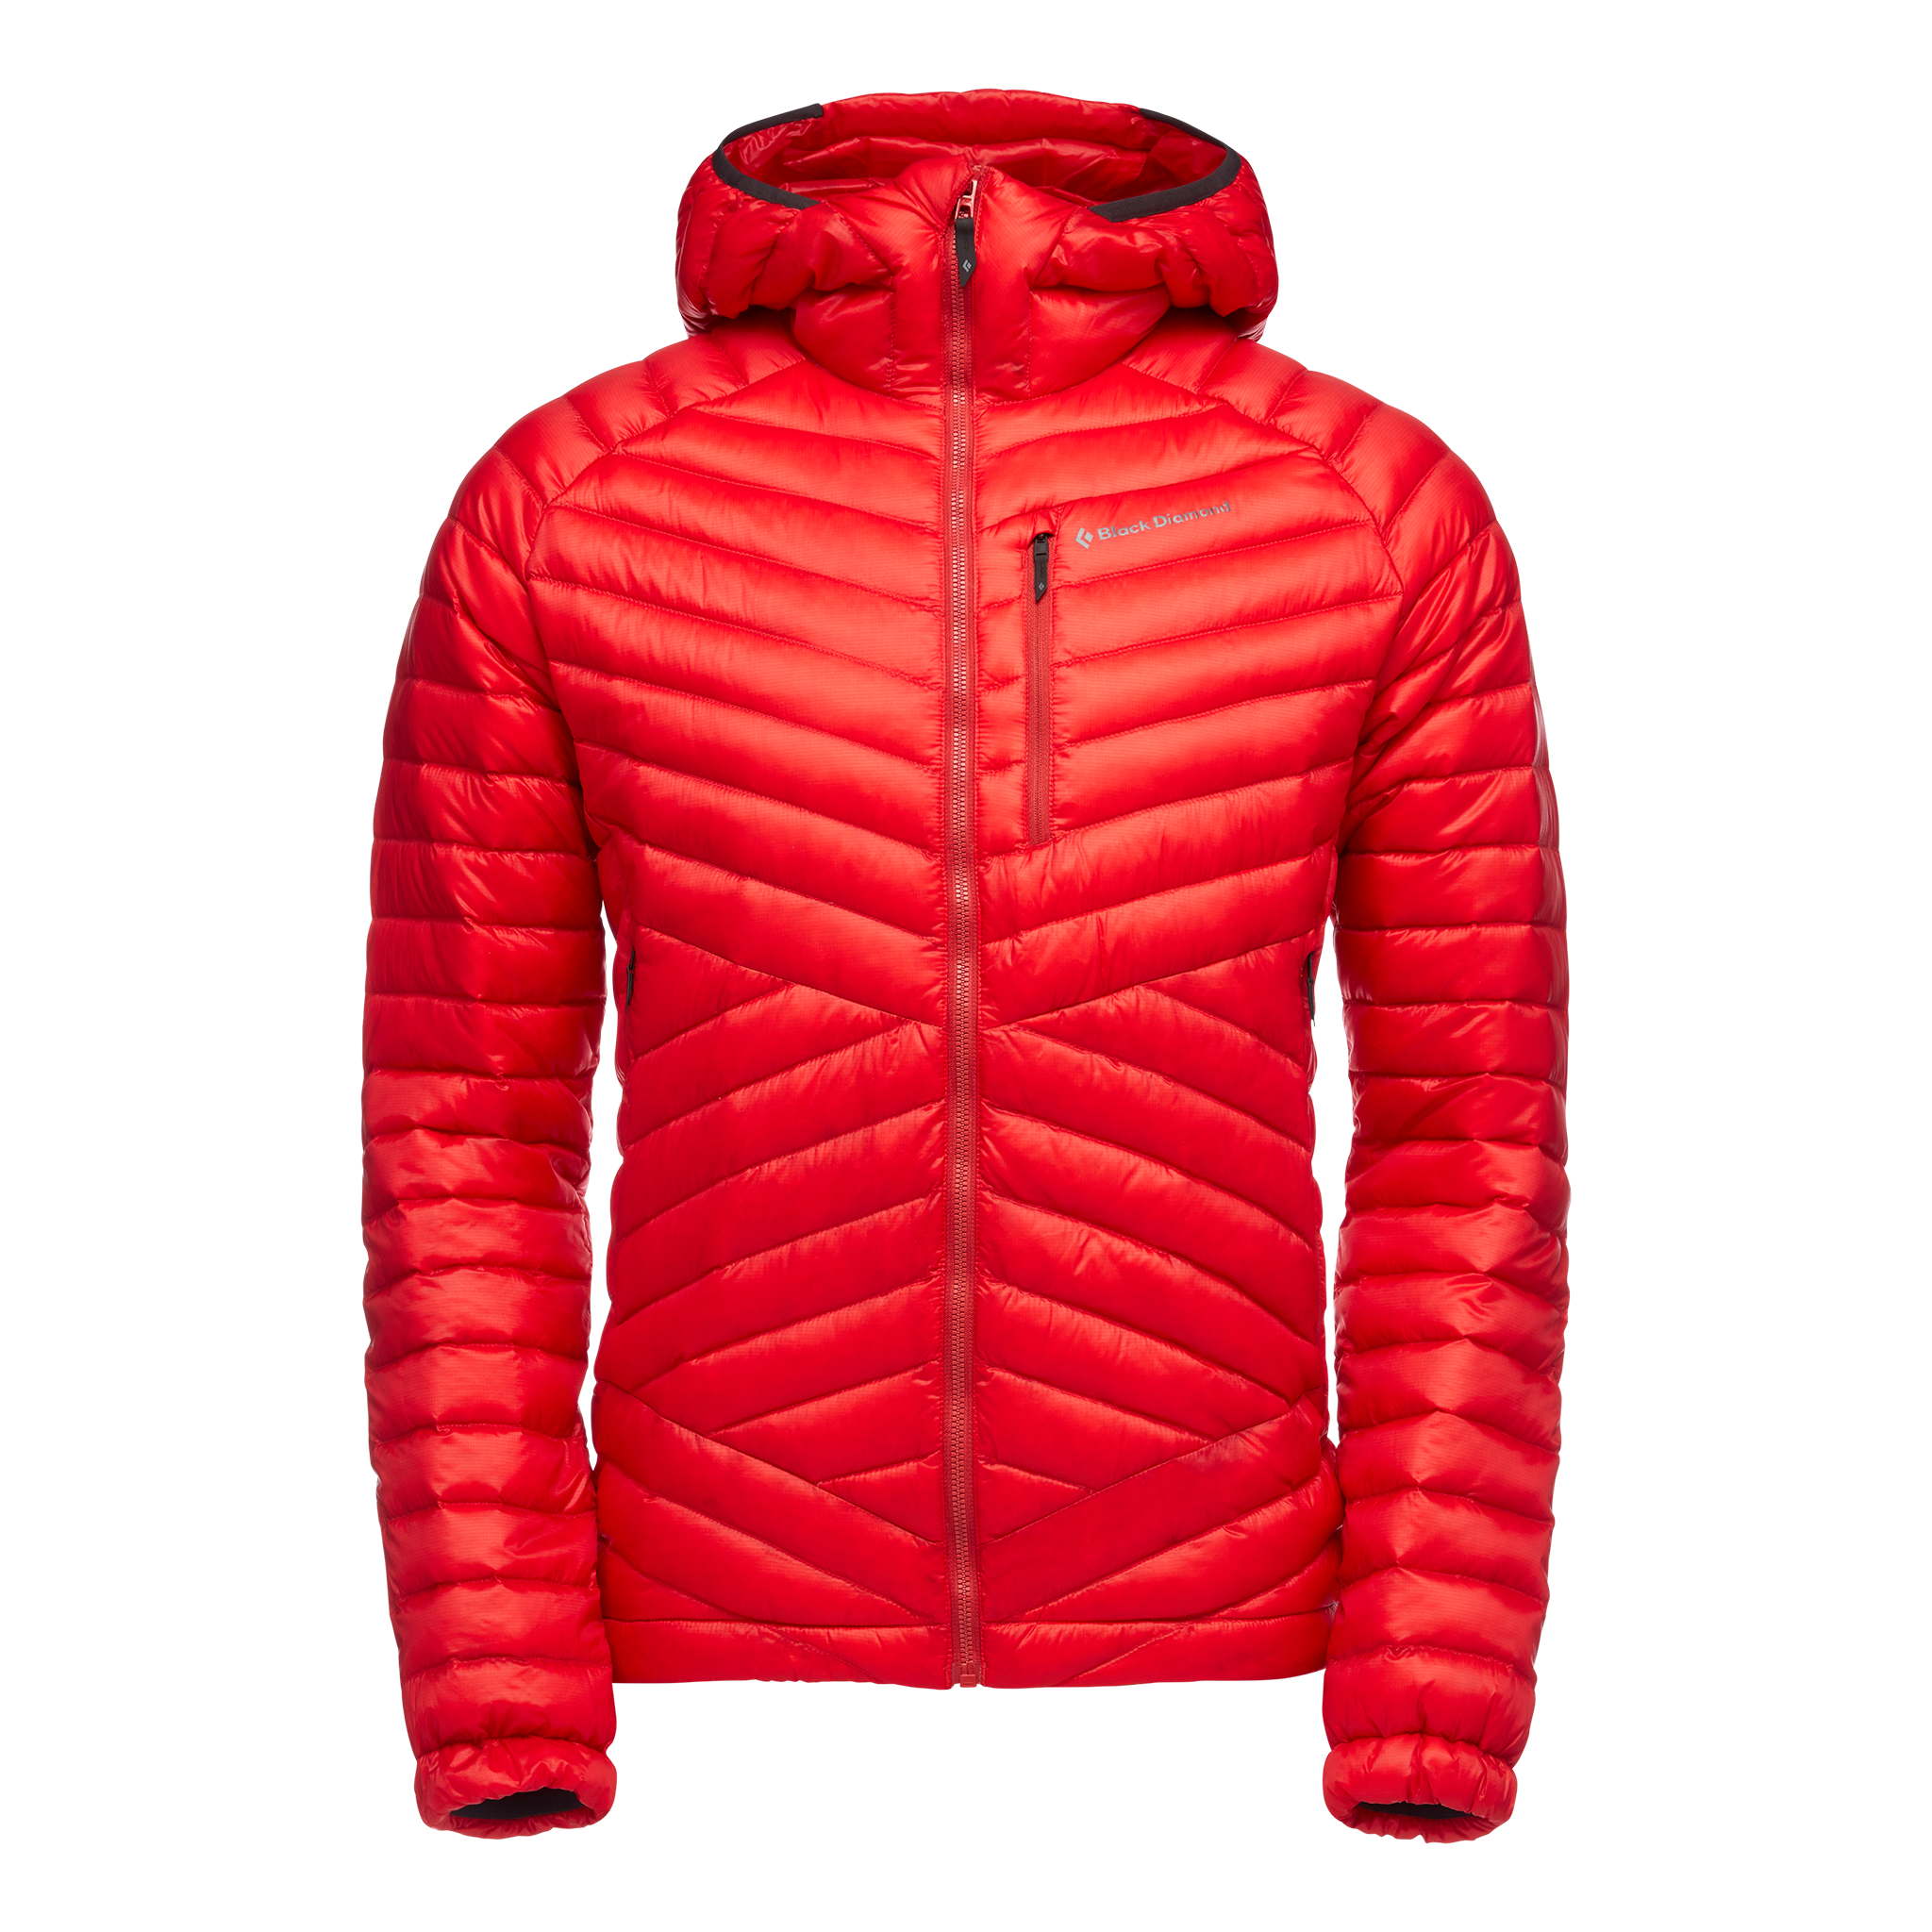 Black Diamond Equipment Men's Approach Down Hoody Size Small, in Hyper Red